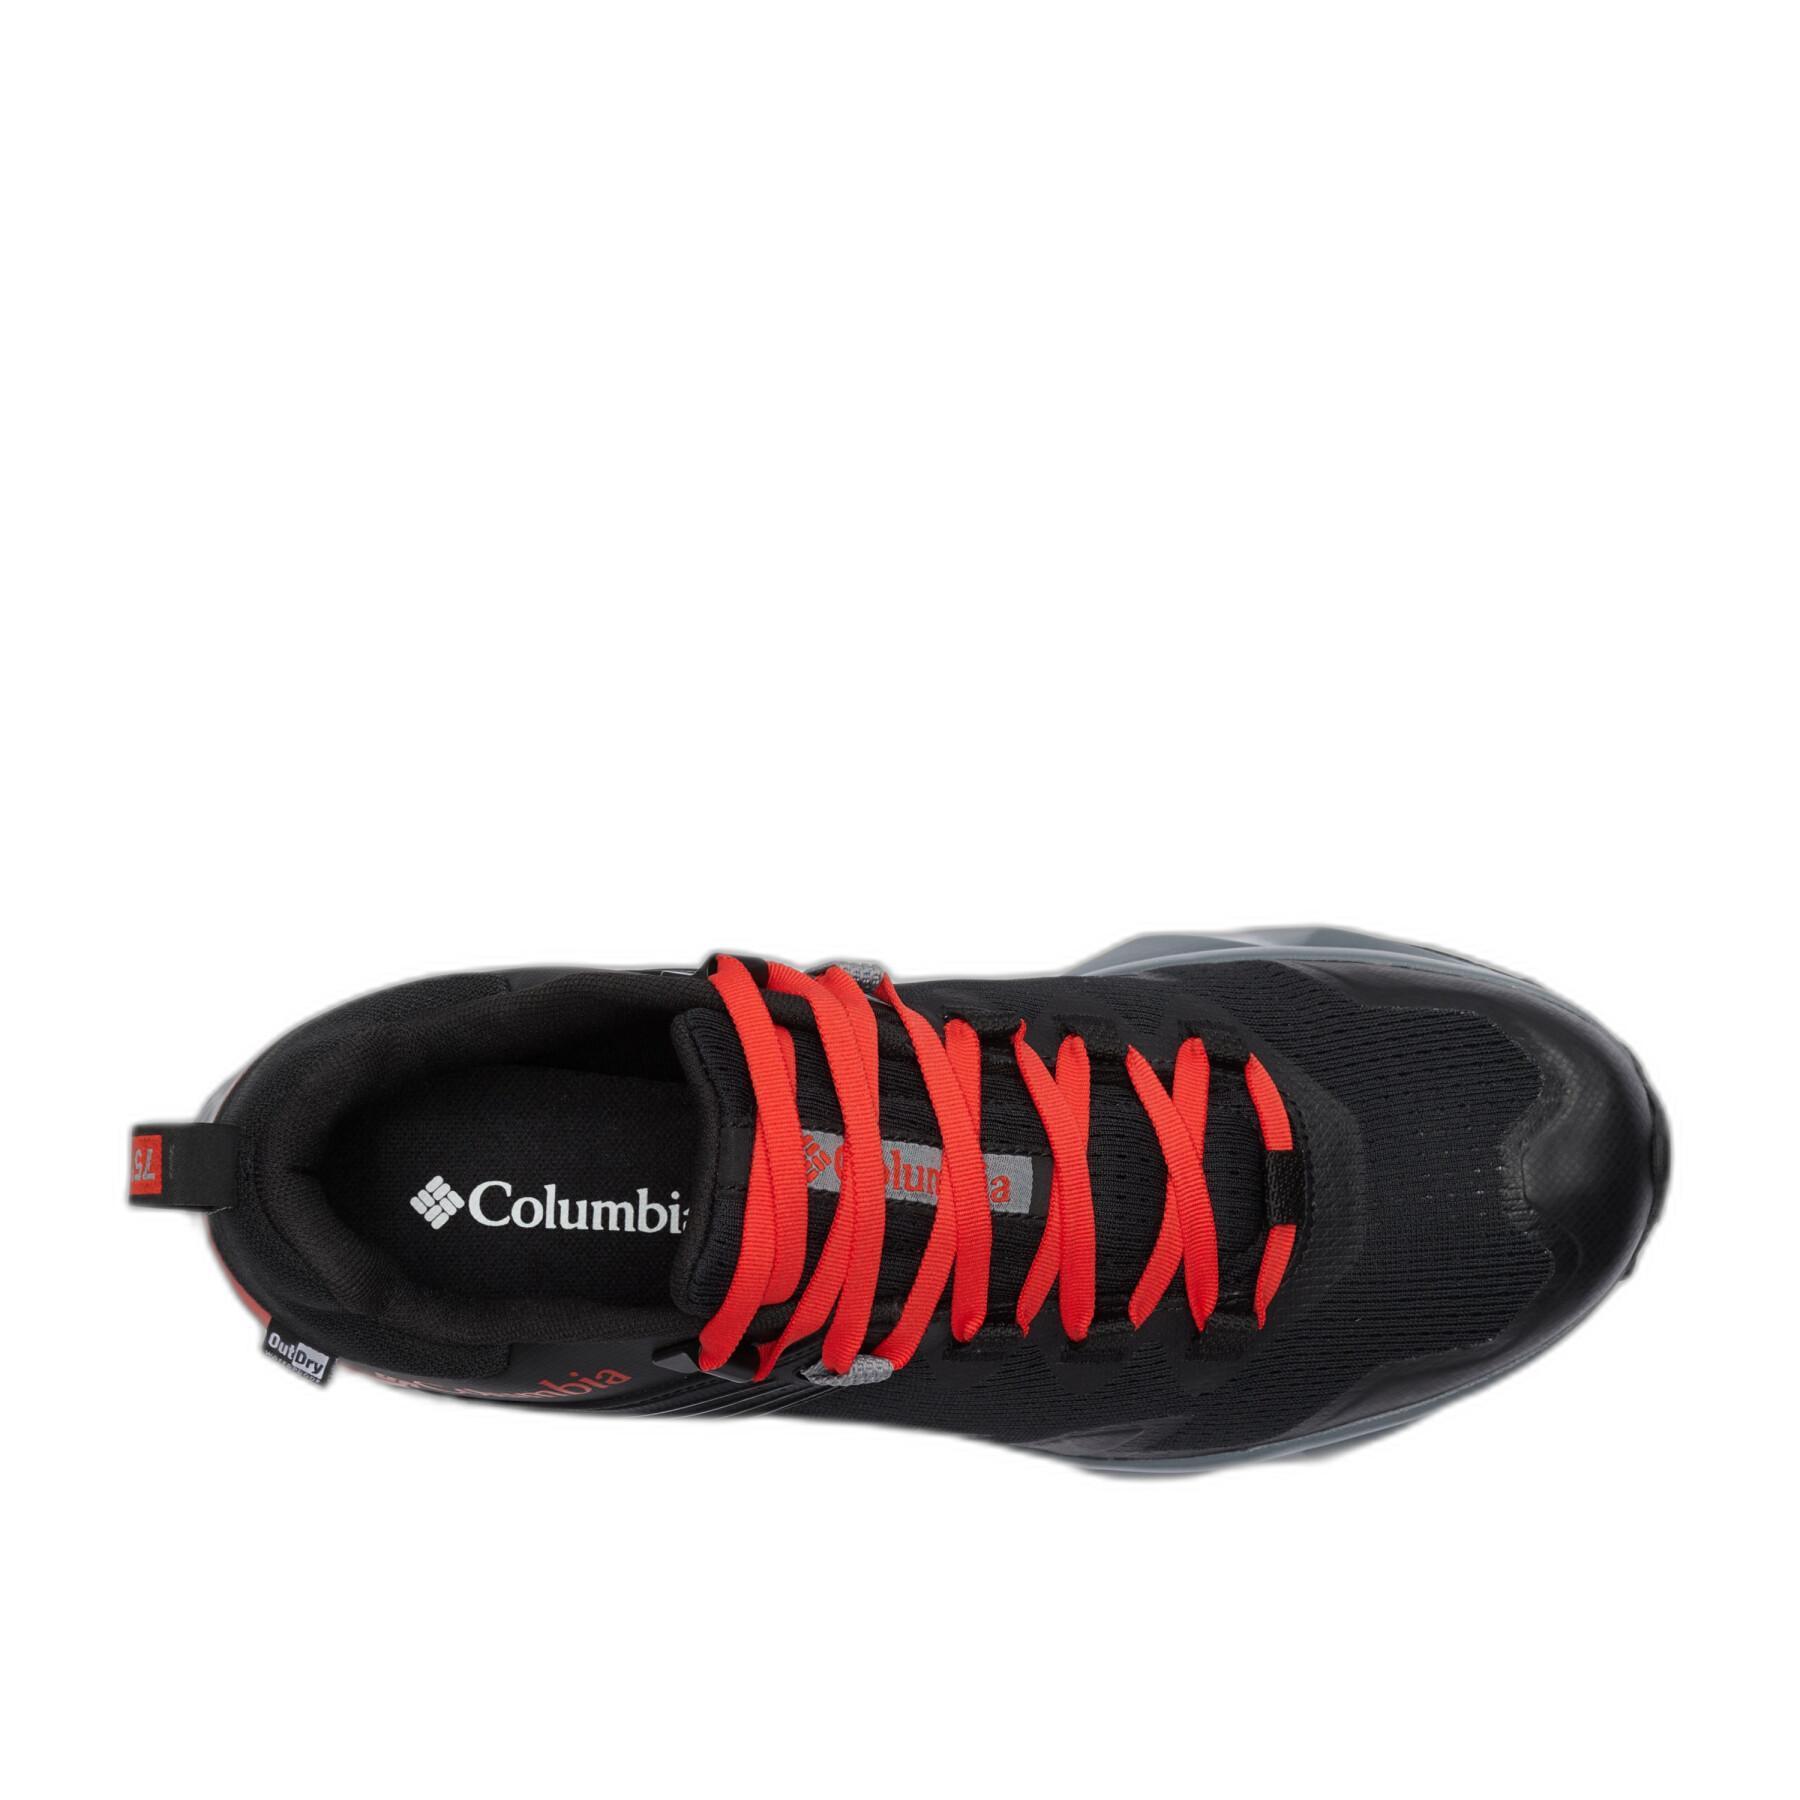 Columbia Facet™ 75 Outdry™ hiking boots